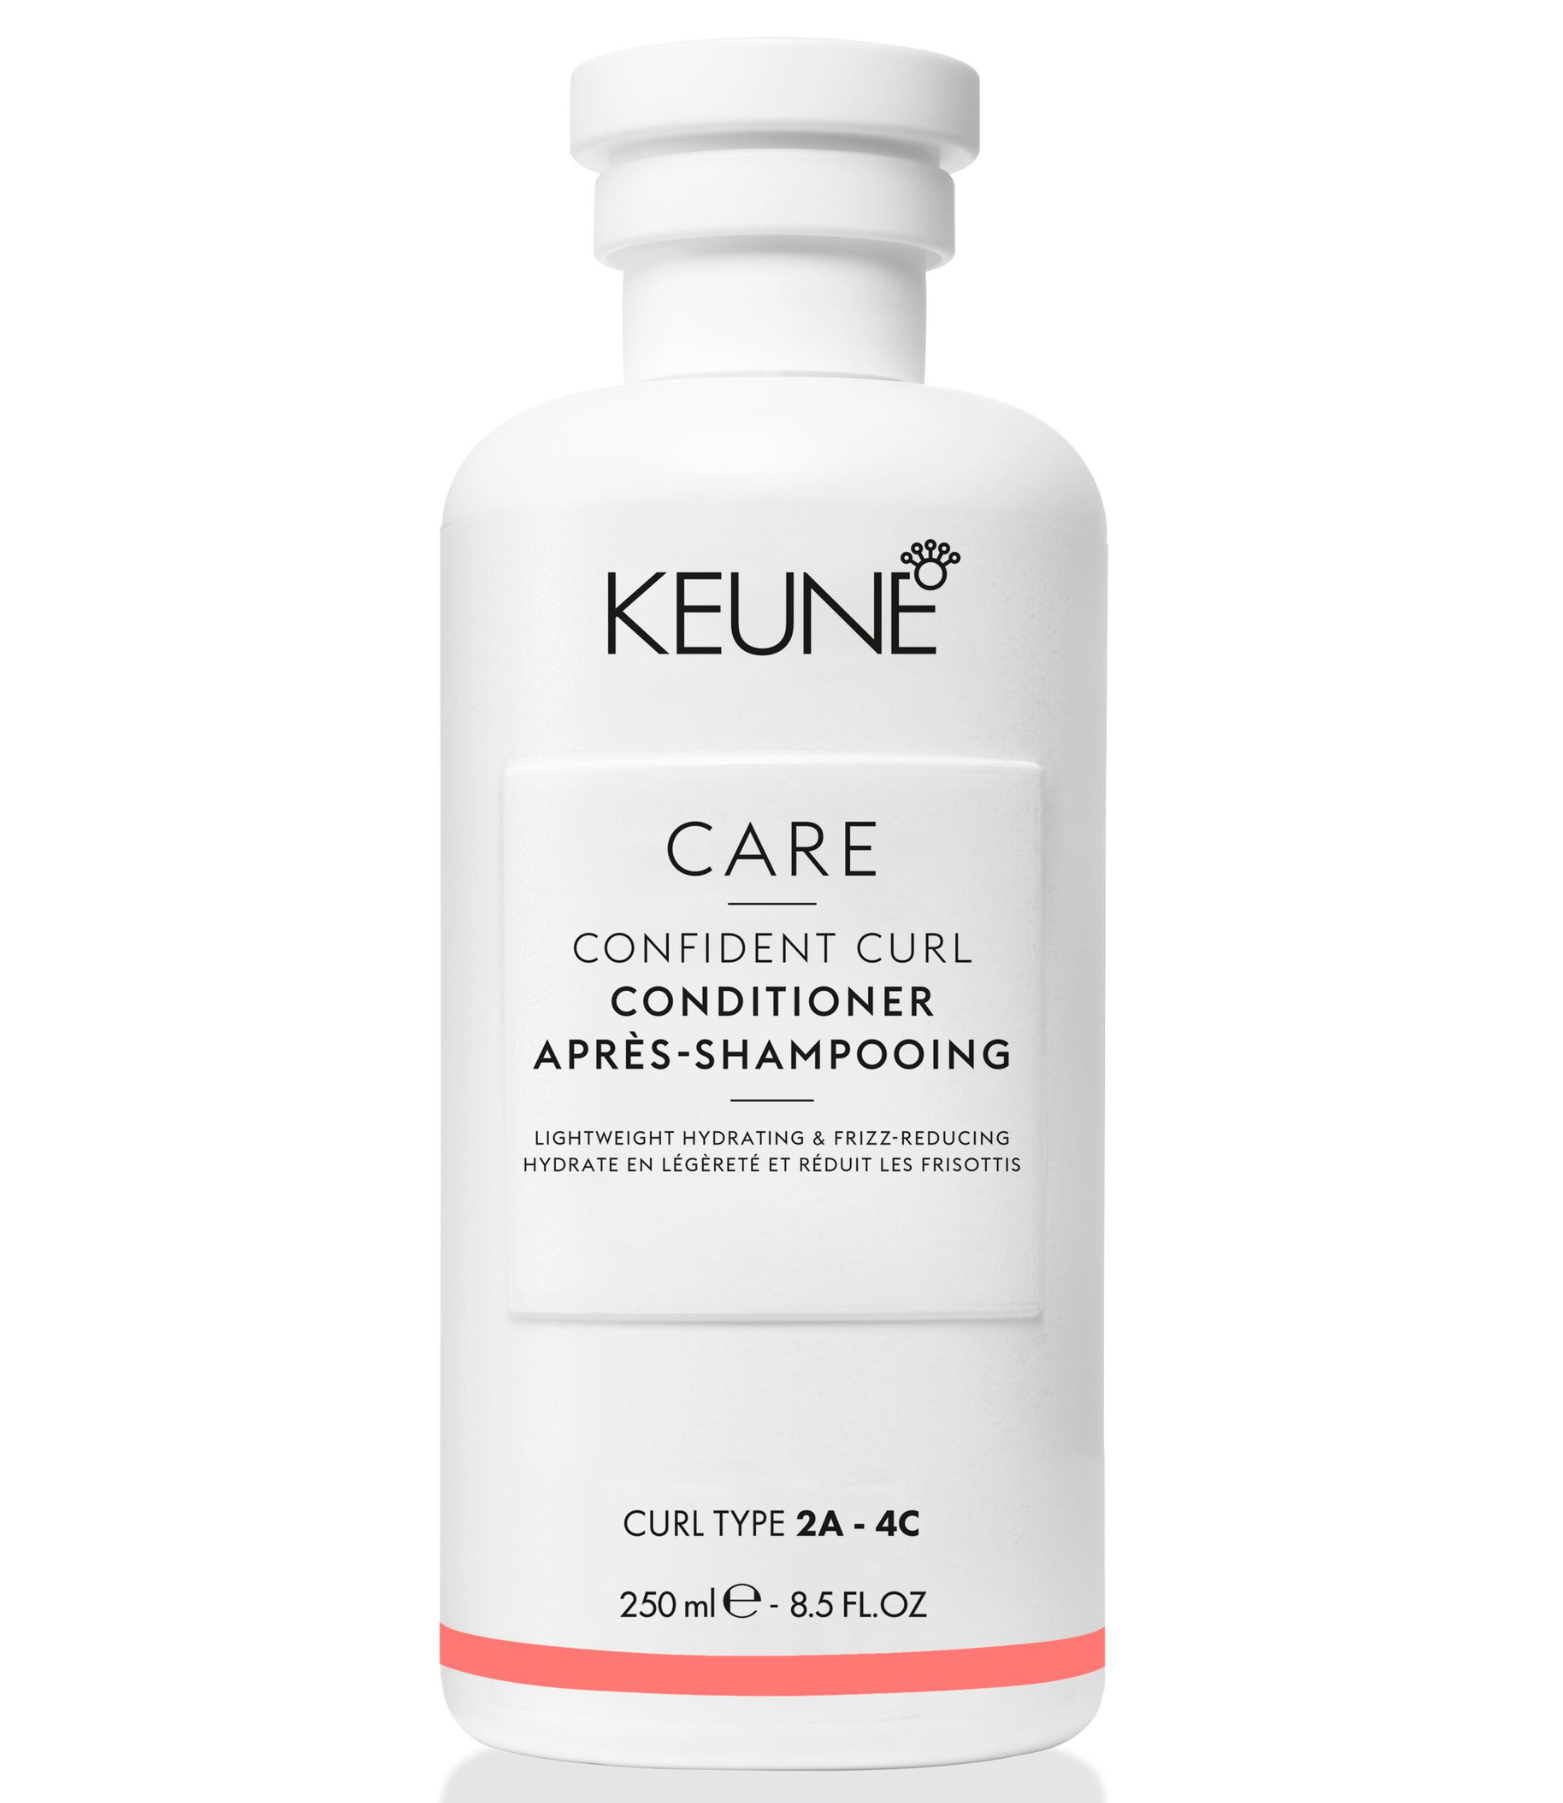 Confident Curl Conditioner, specially designed for curly hair, is a hair care product that makes your curls smooth and elastic. It helps reduce frizz and prevents the curls from tangling. On keune.ch.